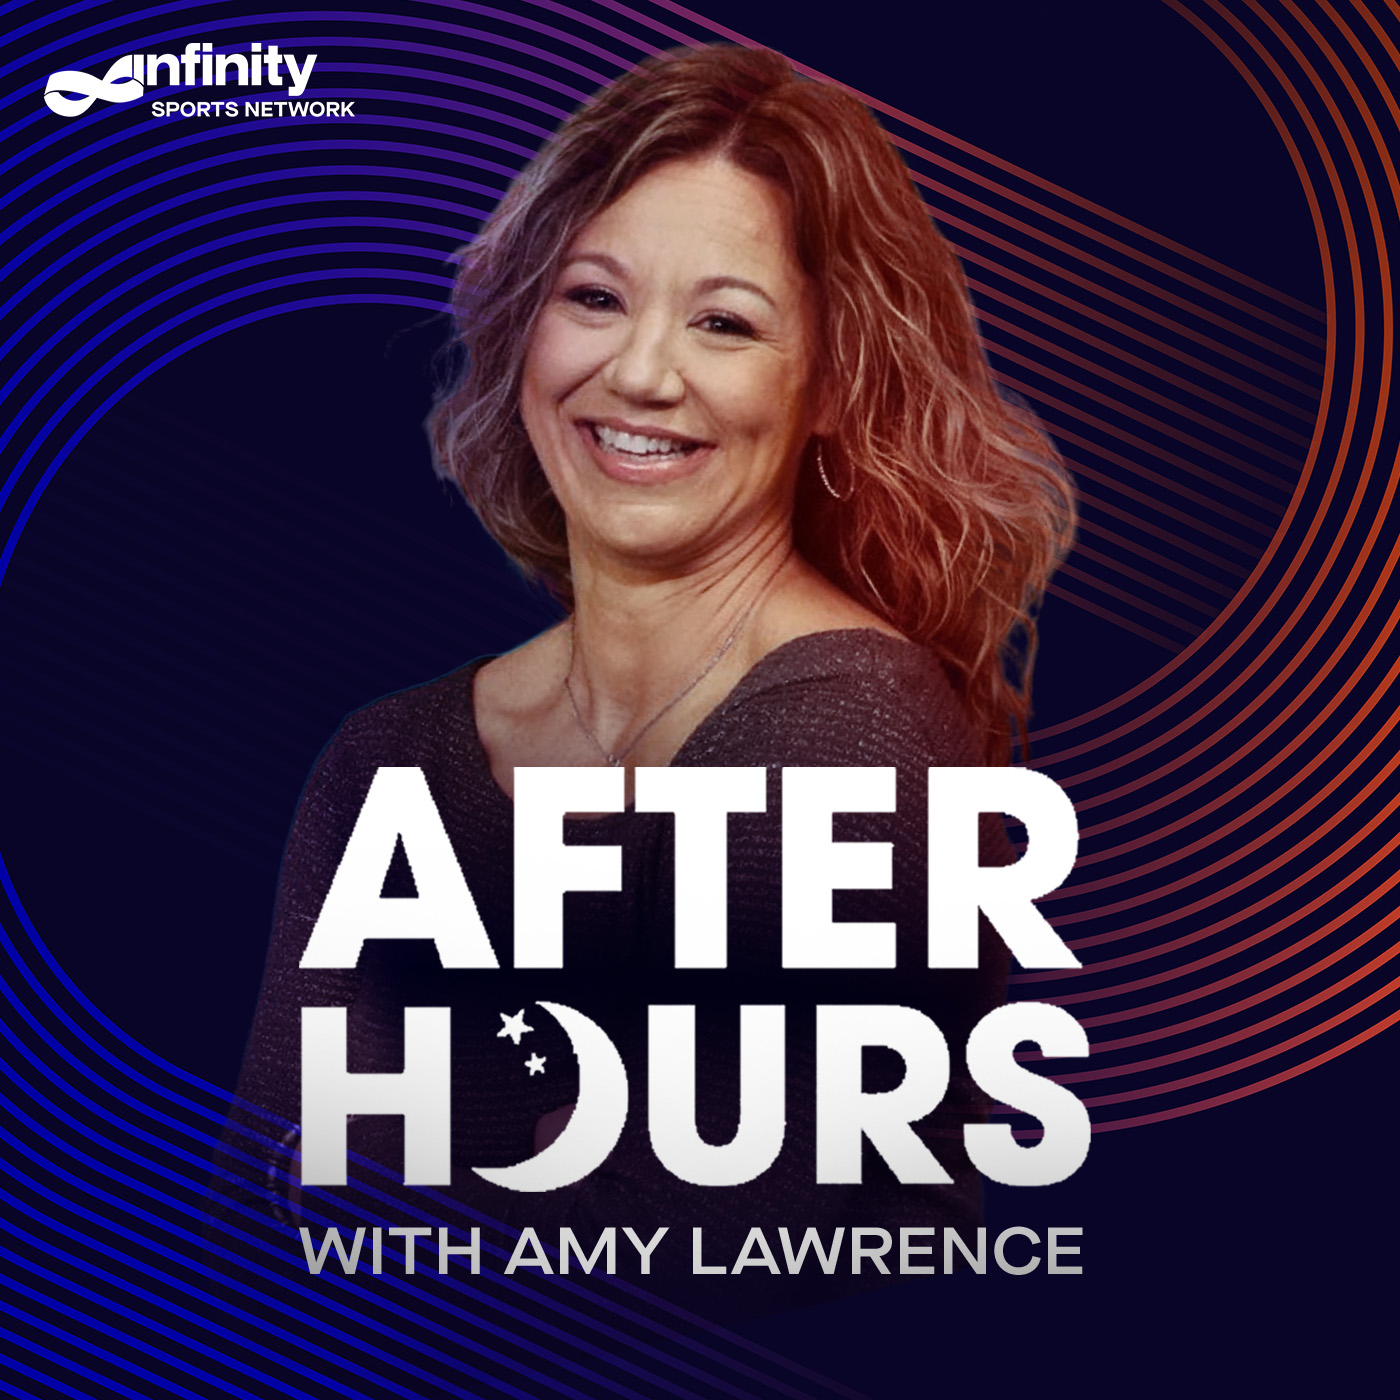 6/1/21 After Hours with Amy Lawrence PODCAST: Hour 1